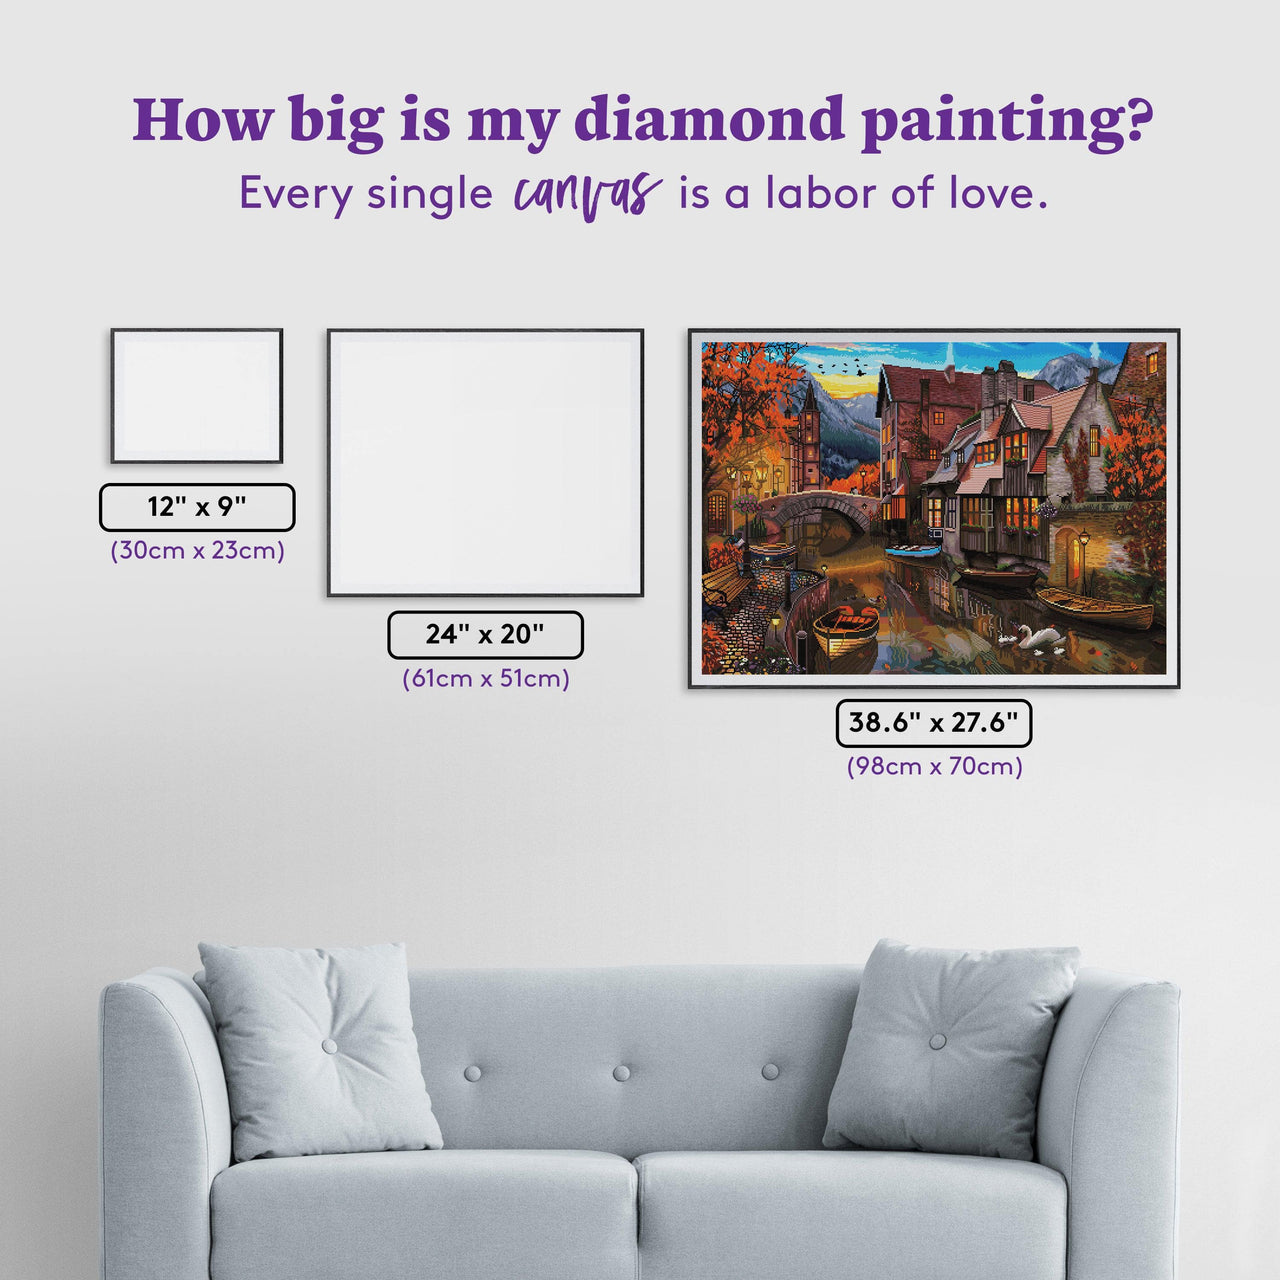 Diamond Painting Canal Home 38.6" x 27.6" (98cm x 70cm) / Square with 64 Colors including 5 ABs / 110,433